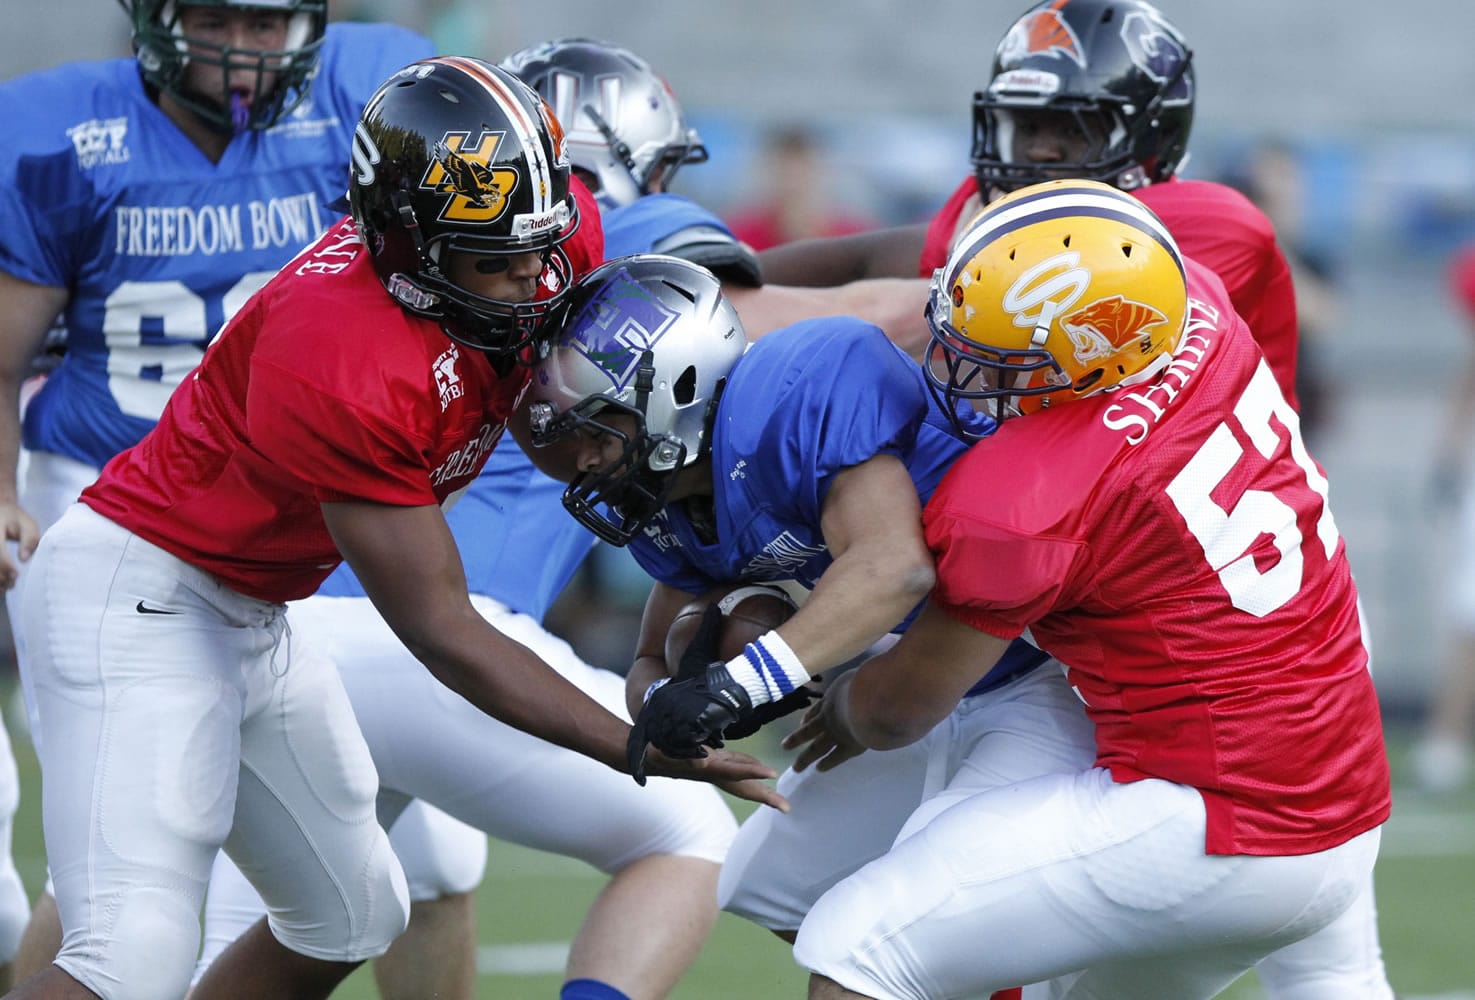 East running back Treve Ensley (center) of Union high school is tackled by West defenders at the Freedom Bowl at Kiggins Bowl.